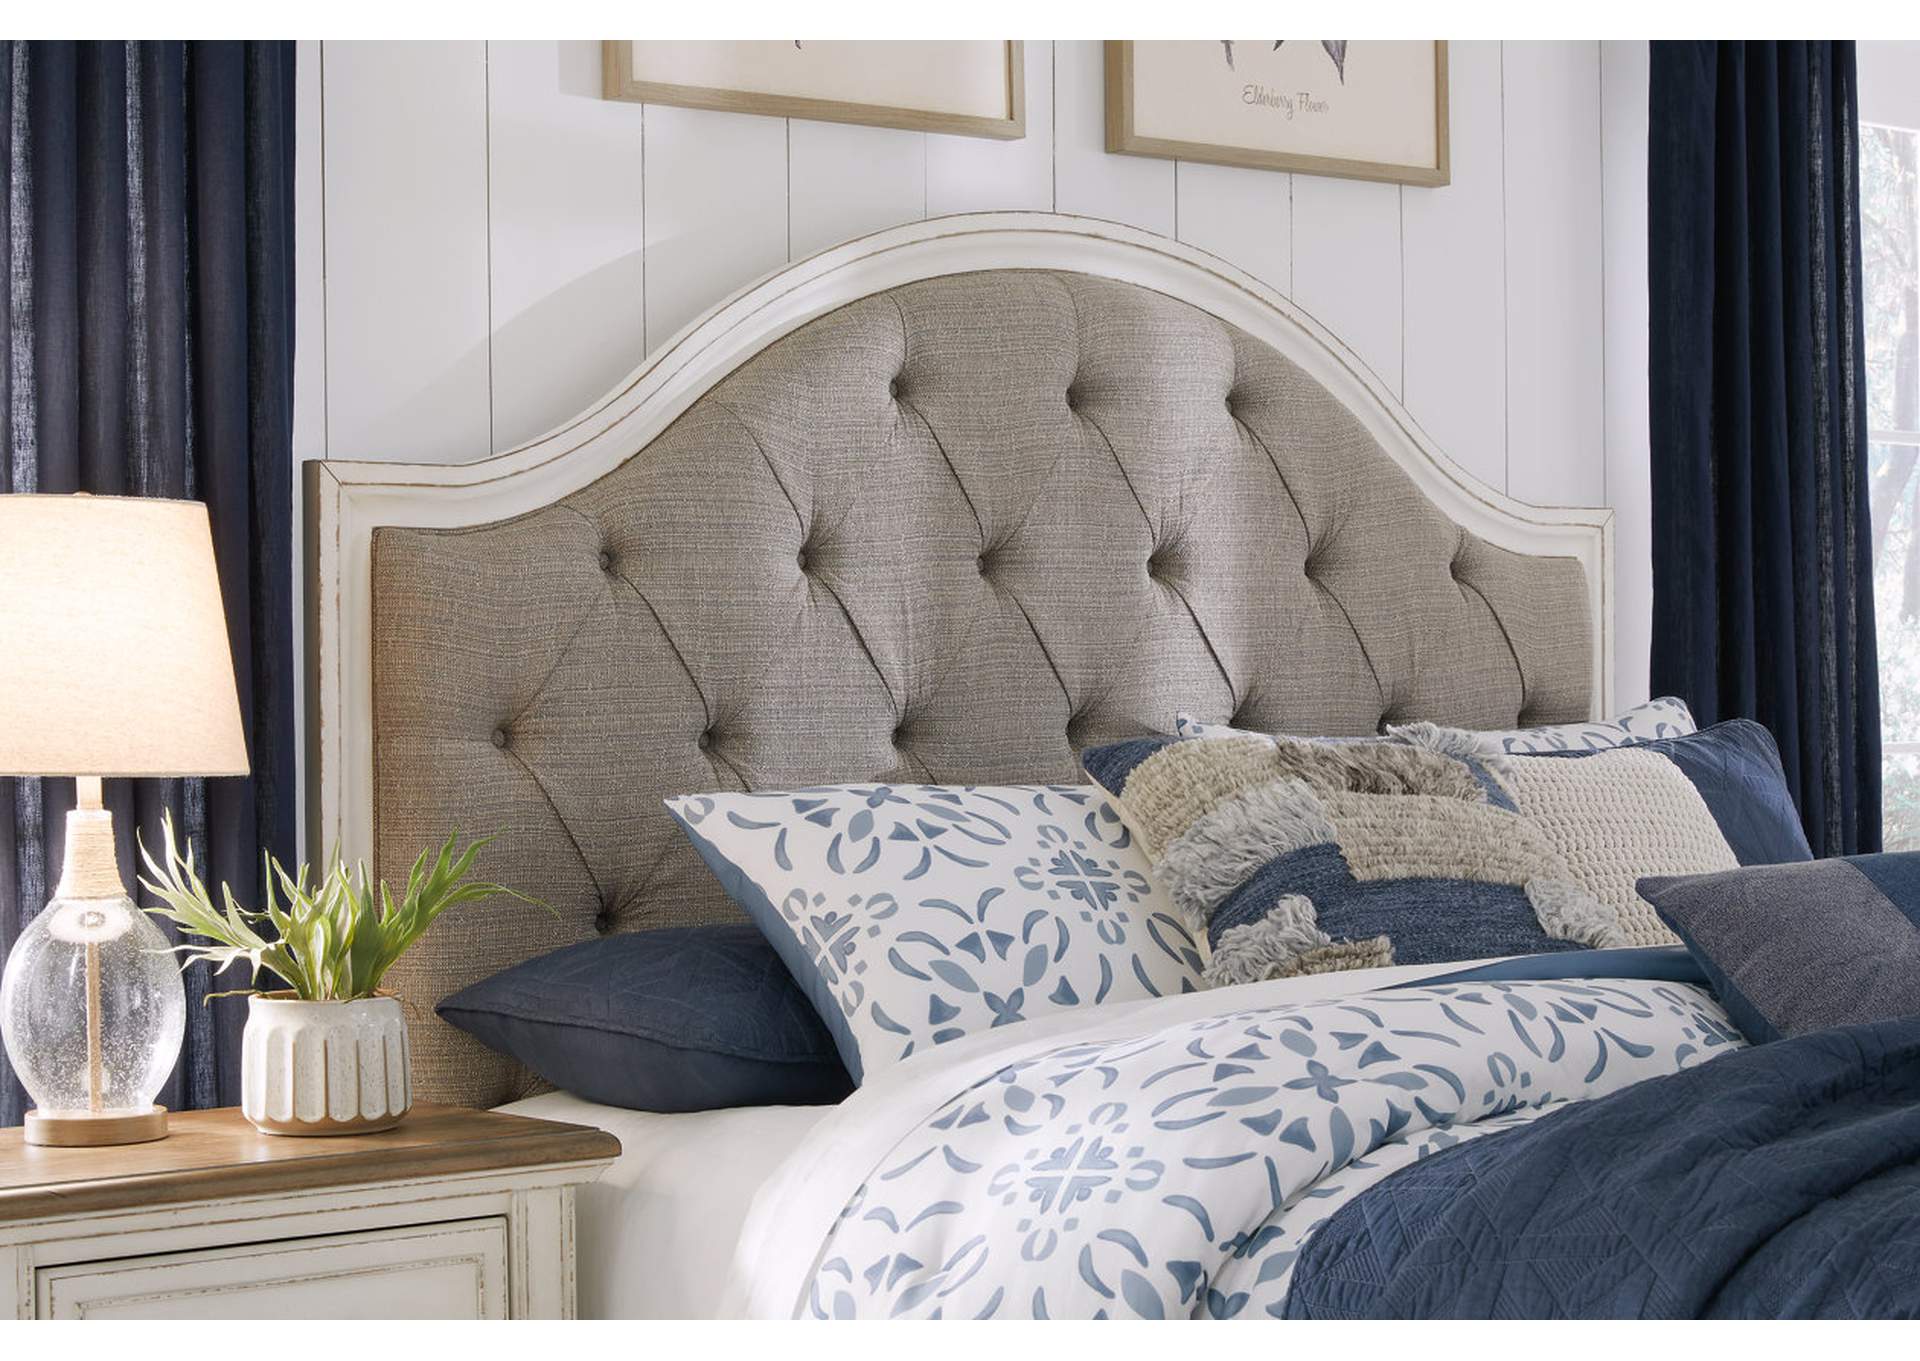 Brollyn California King Upholstered Panel Storage Bed,Signature Design By Ashley